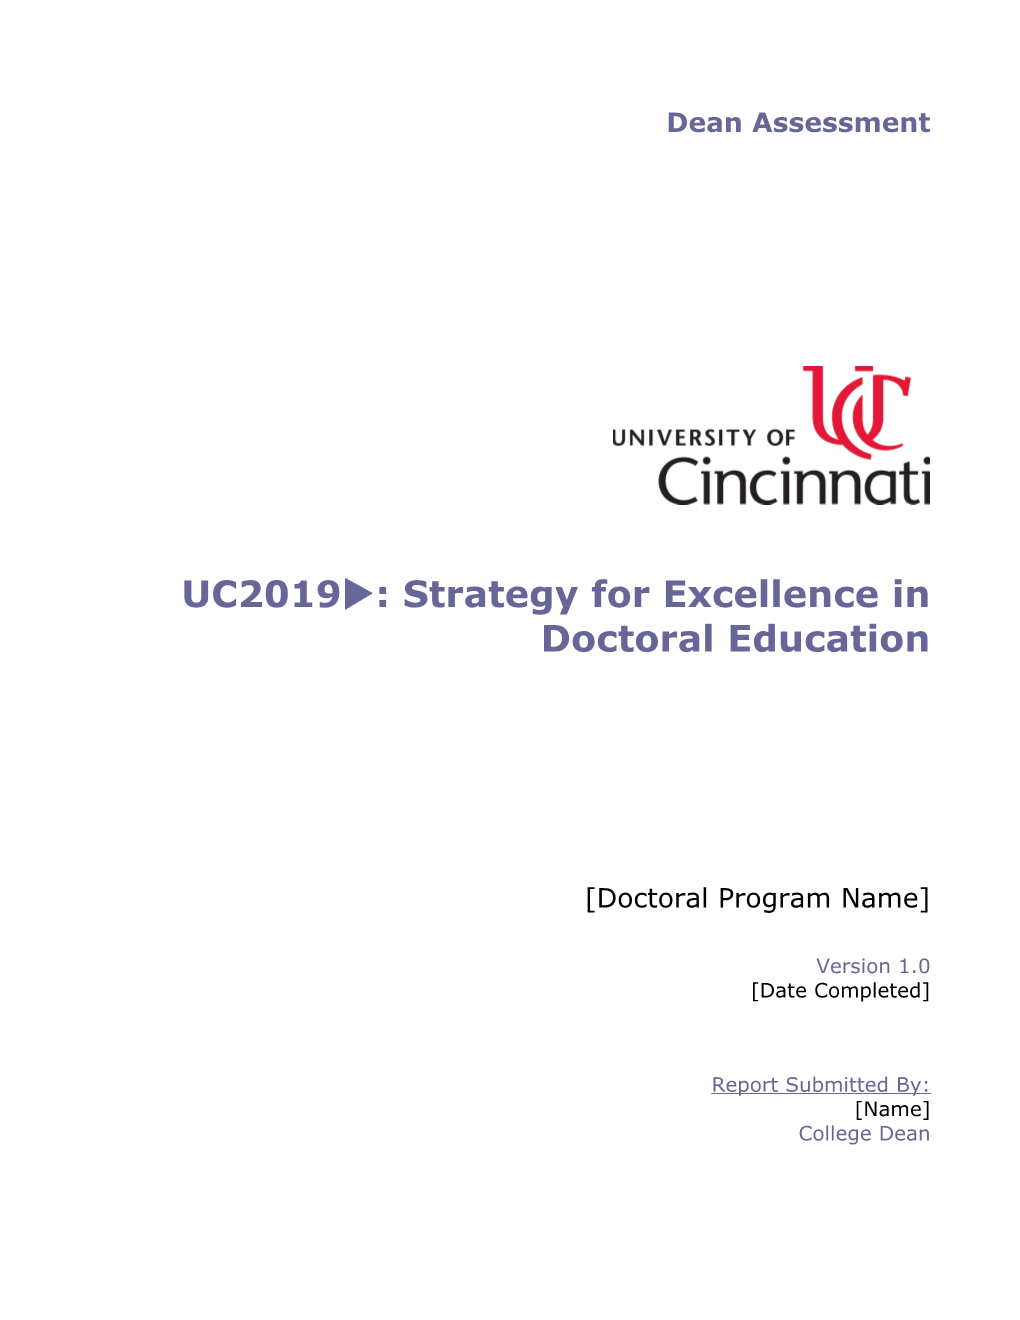 Uc2019u: Strategy for Excellence in Doctoral Education